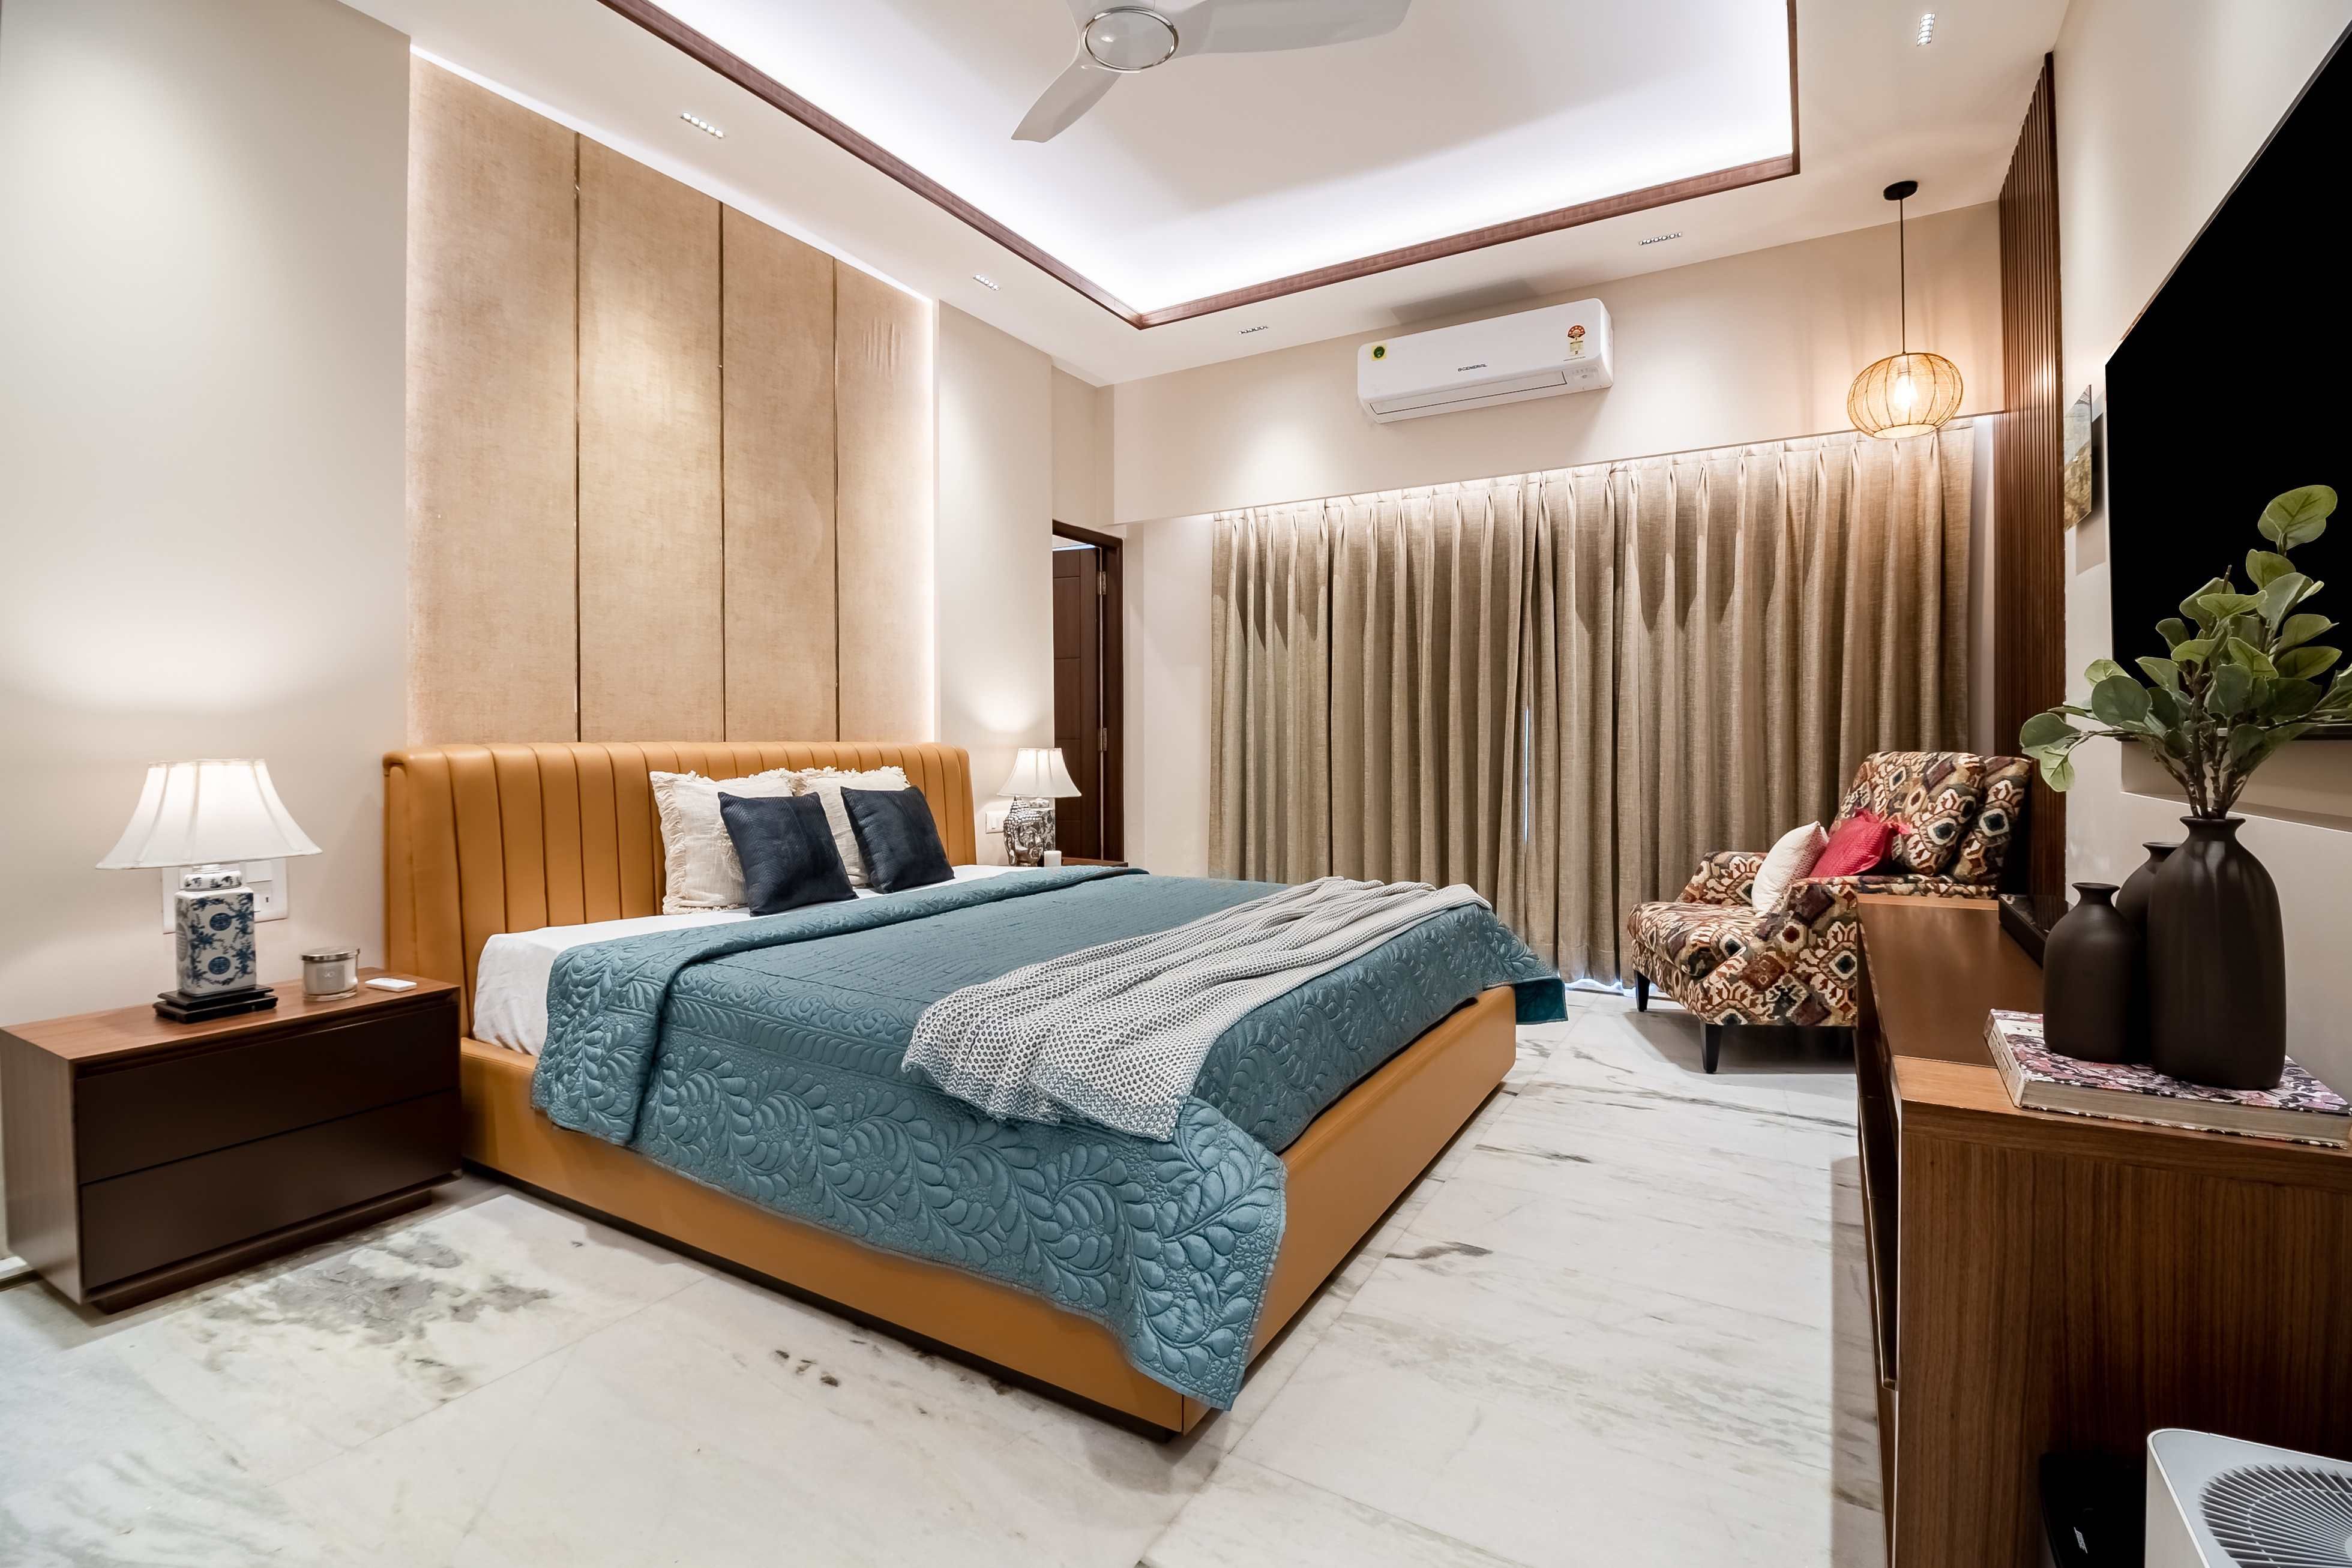 Modern Bedroom Design With A King Size Bed And Wooden Side Tables